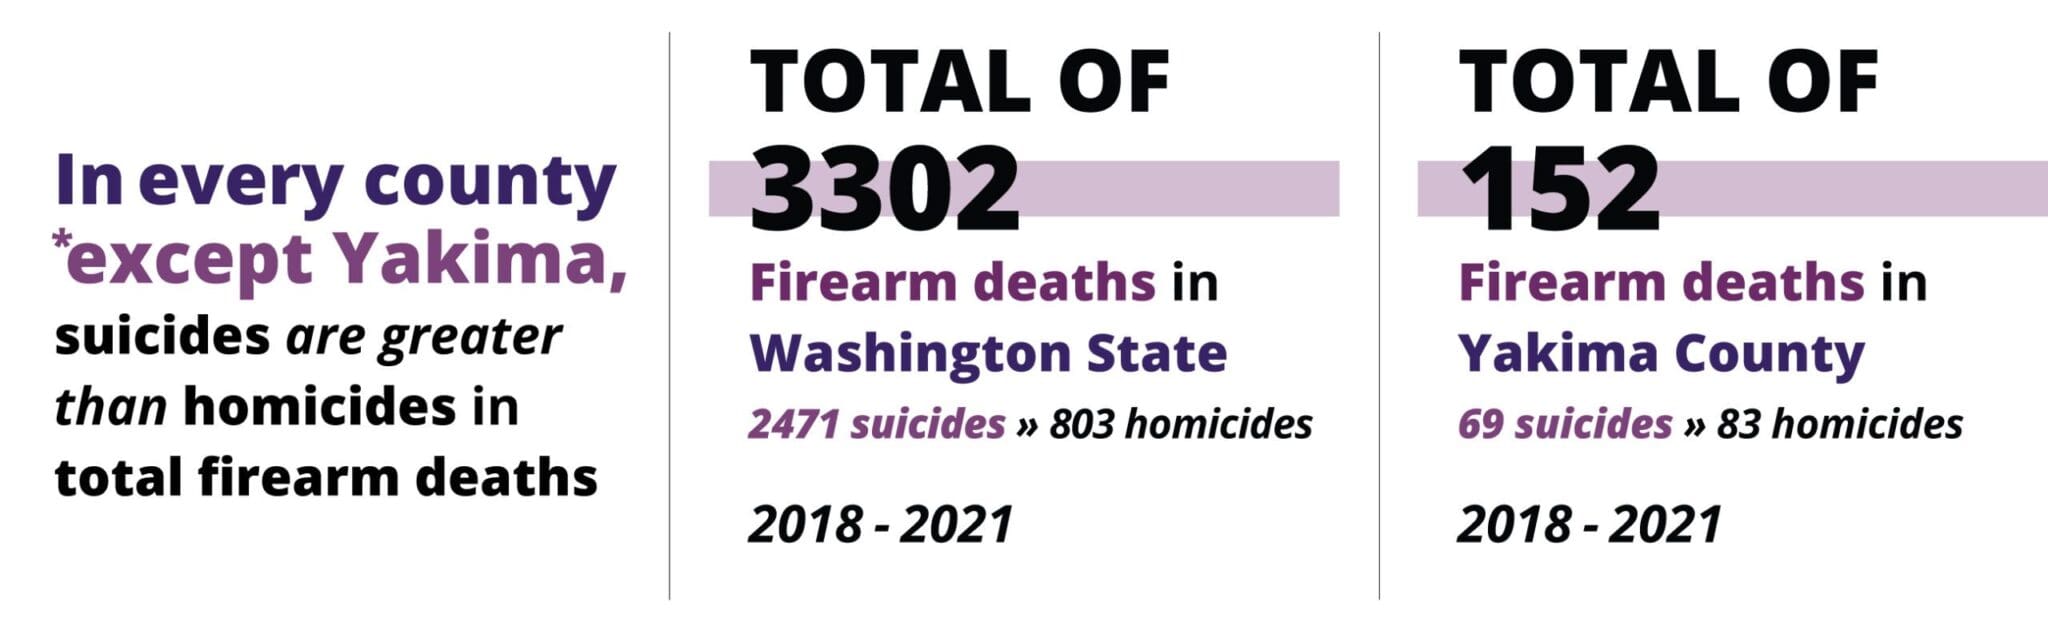 Washington Counties FIREARM STATS: In every county (except Yakima), suicides are greater than homicides in total firearm deaths (2018-2021). TOTAL OF 3302 Firearm deaths in Washington State. Comparison: 2471 suicides » 803 homicides. TOTAL OF 152 Firearm deaths in Yakima County. Comparison: 69 suicides » 83 homicides. Source: CDC Wonder.